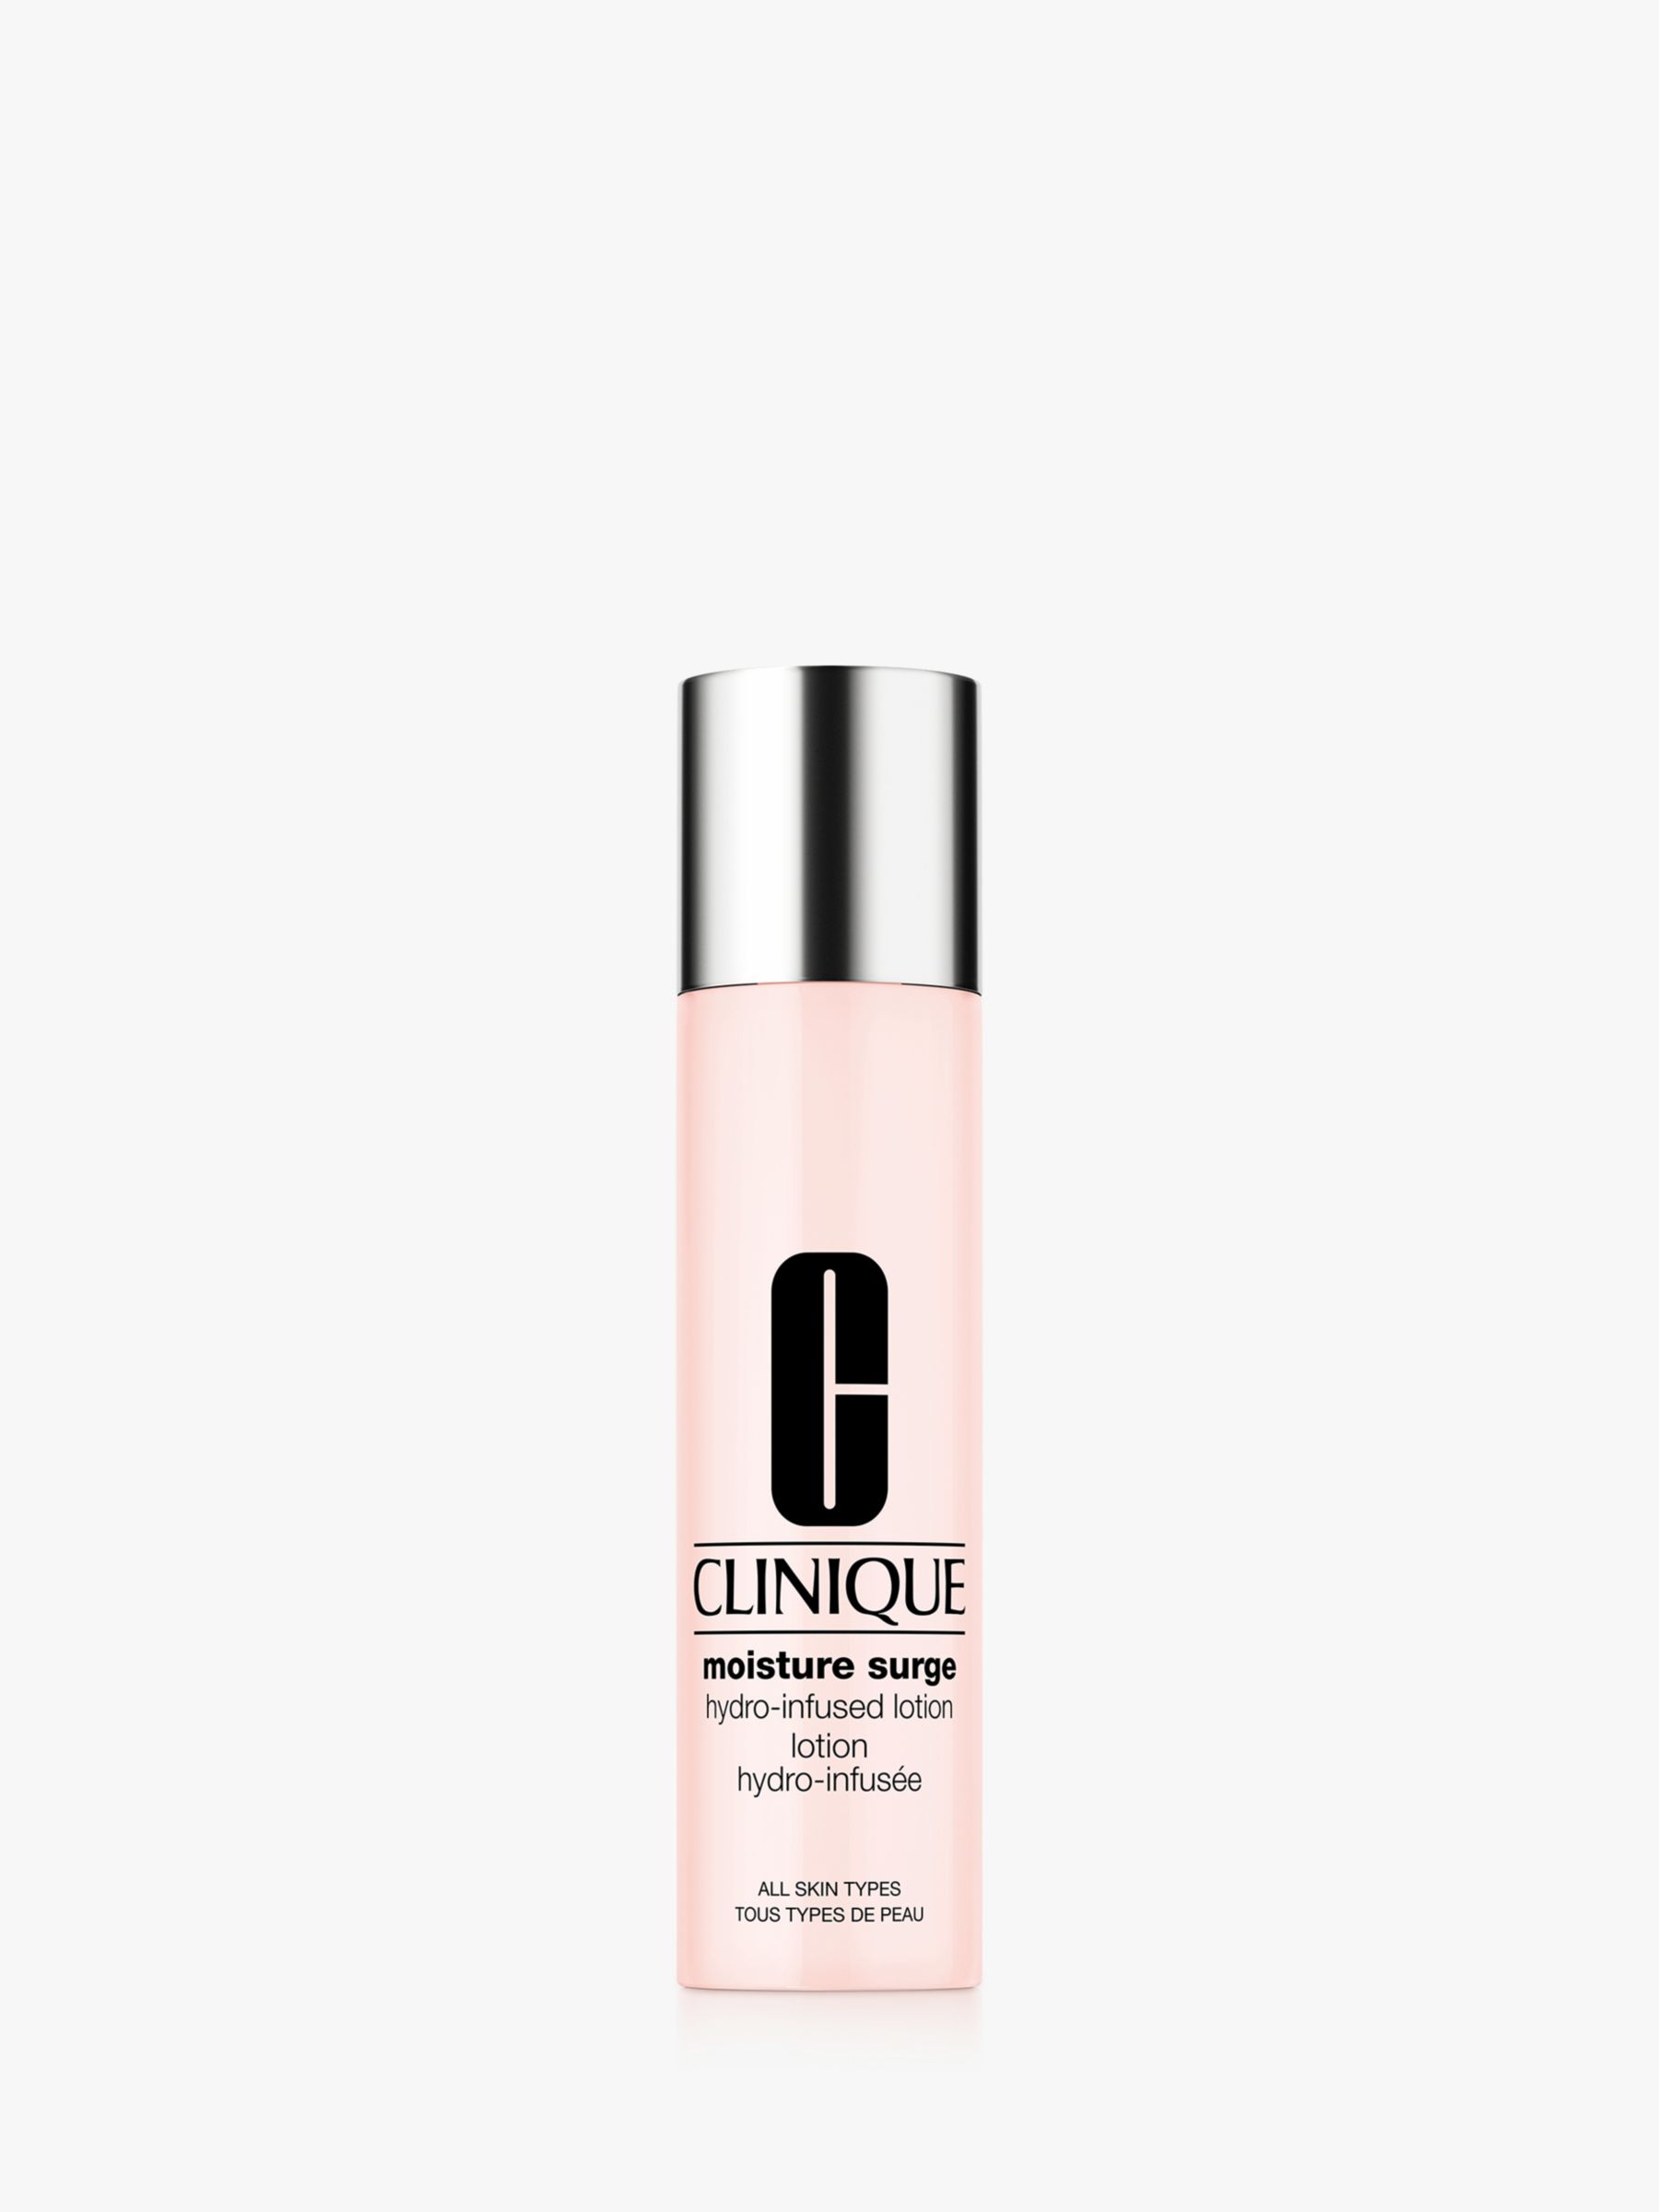 Clinique Moisture Surge Hydro-Infused Lotion, 200ml 1